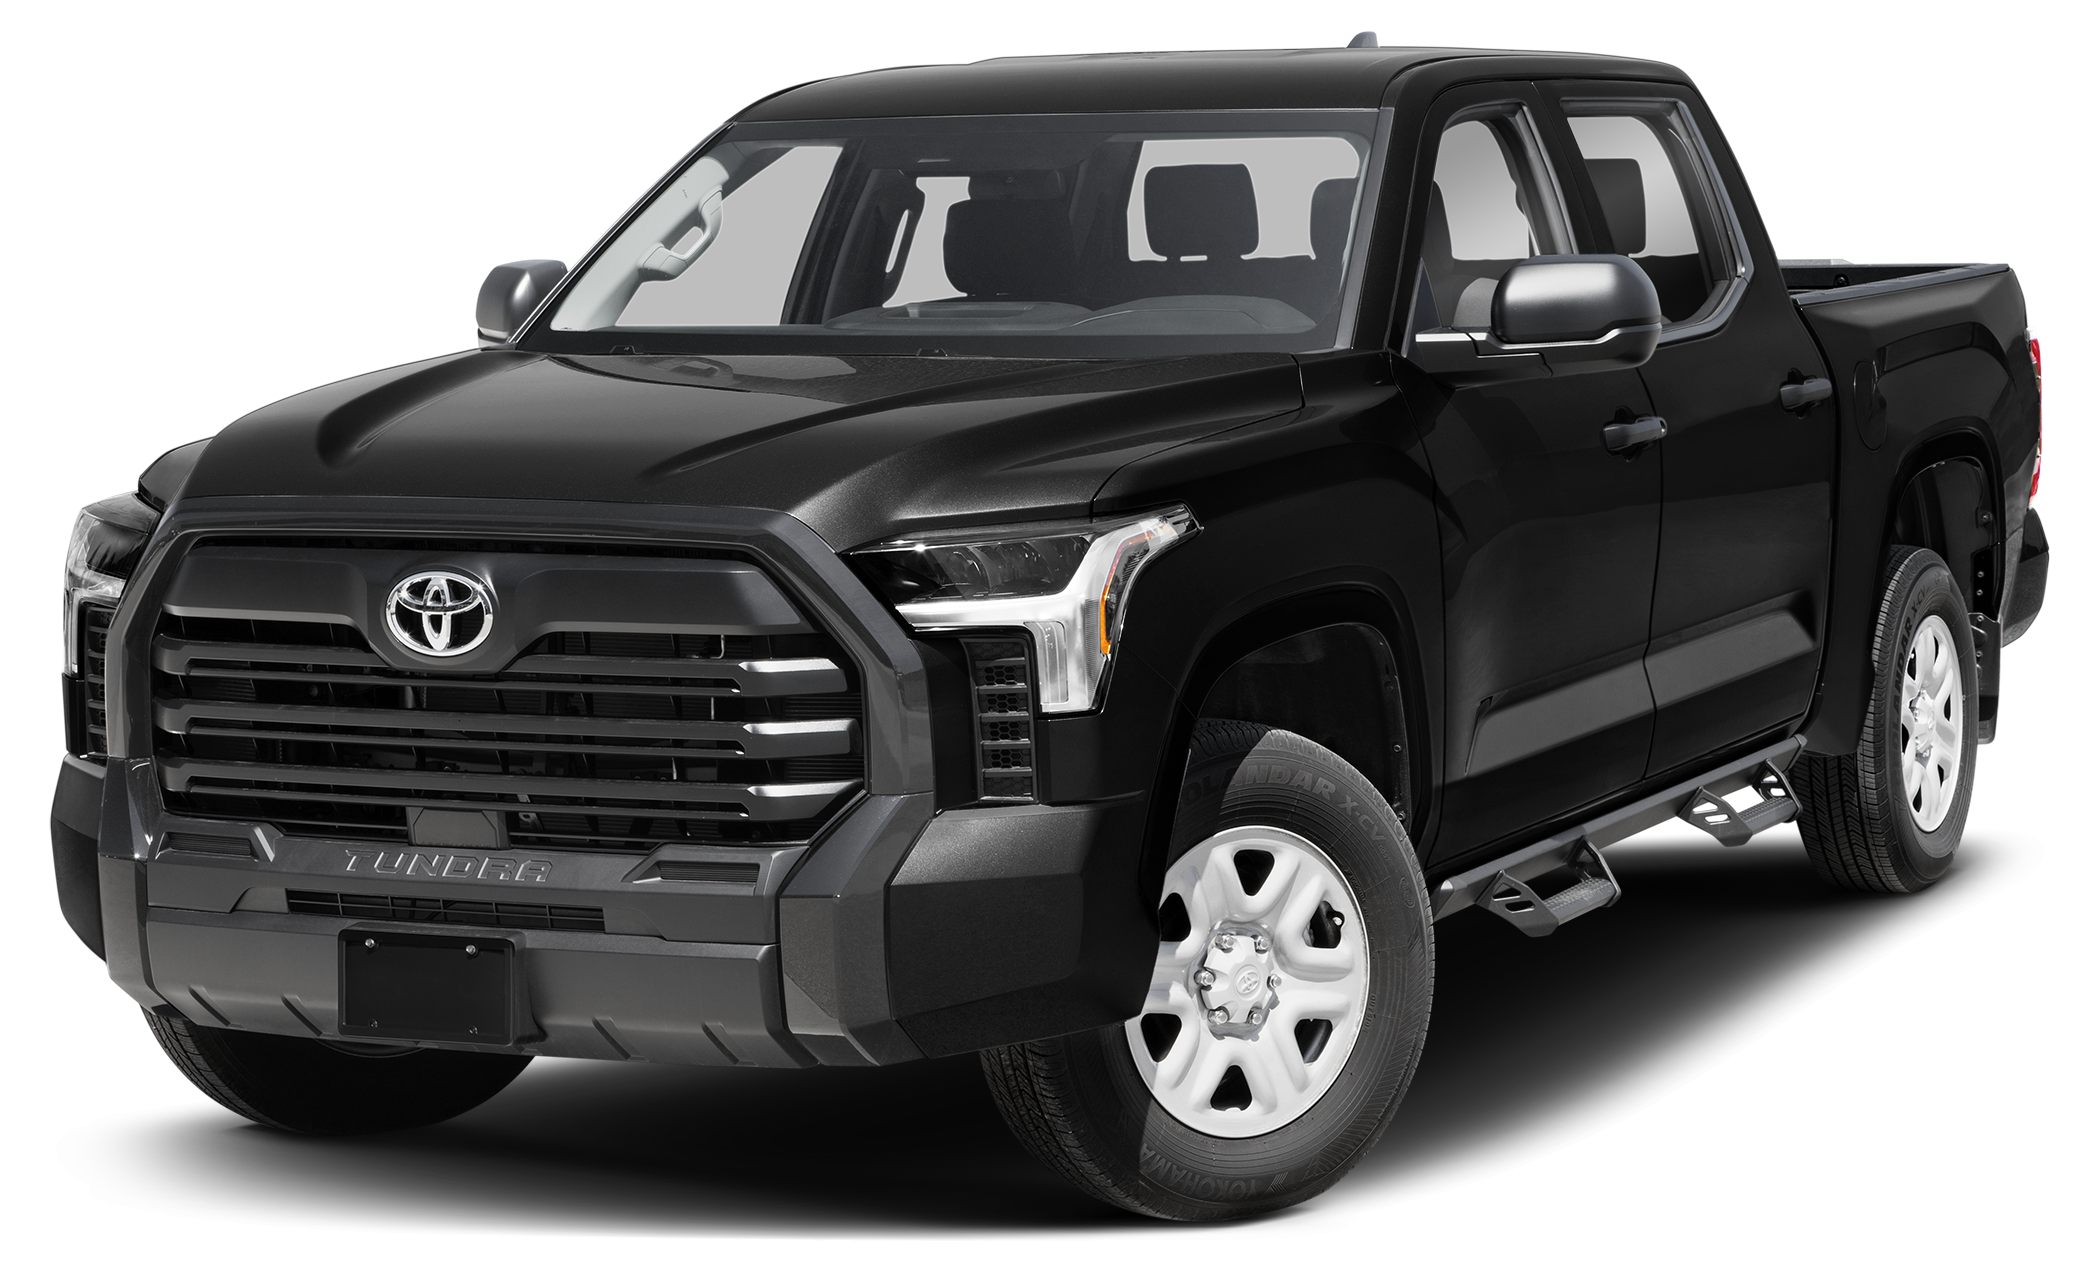 2023 Toyota Tundra: Photos, Specs, & Review - Forbes Wheels